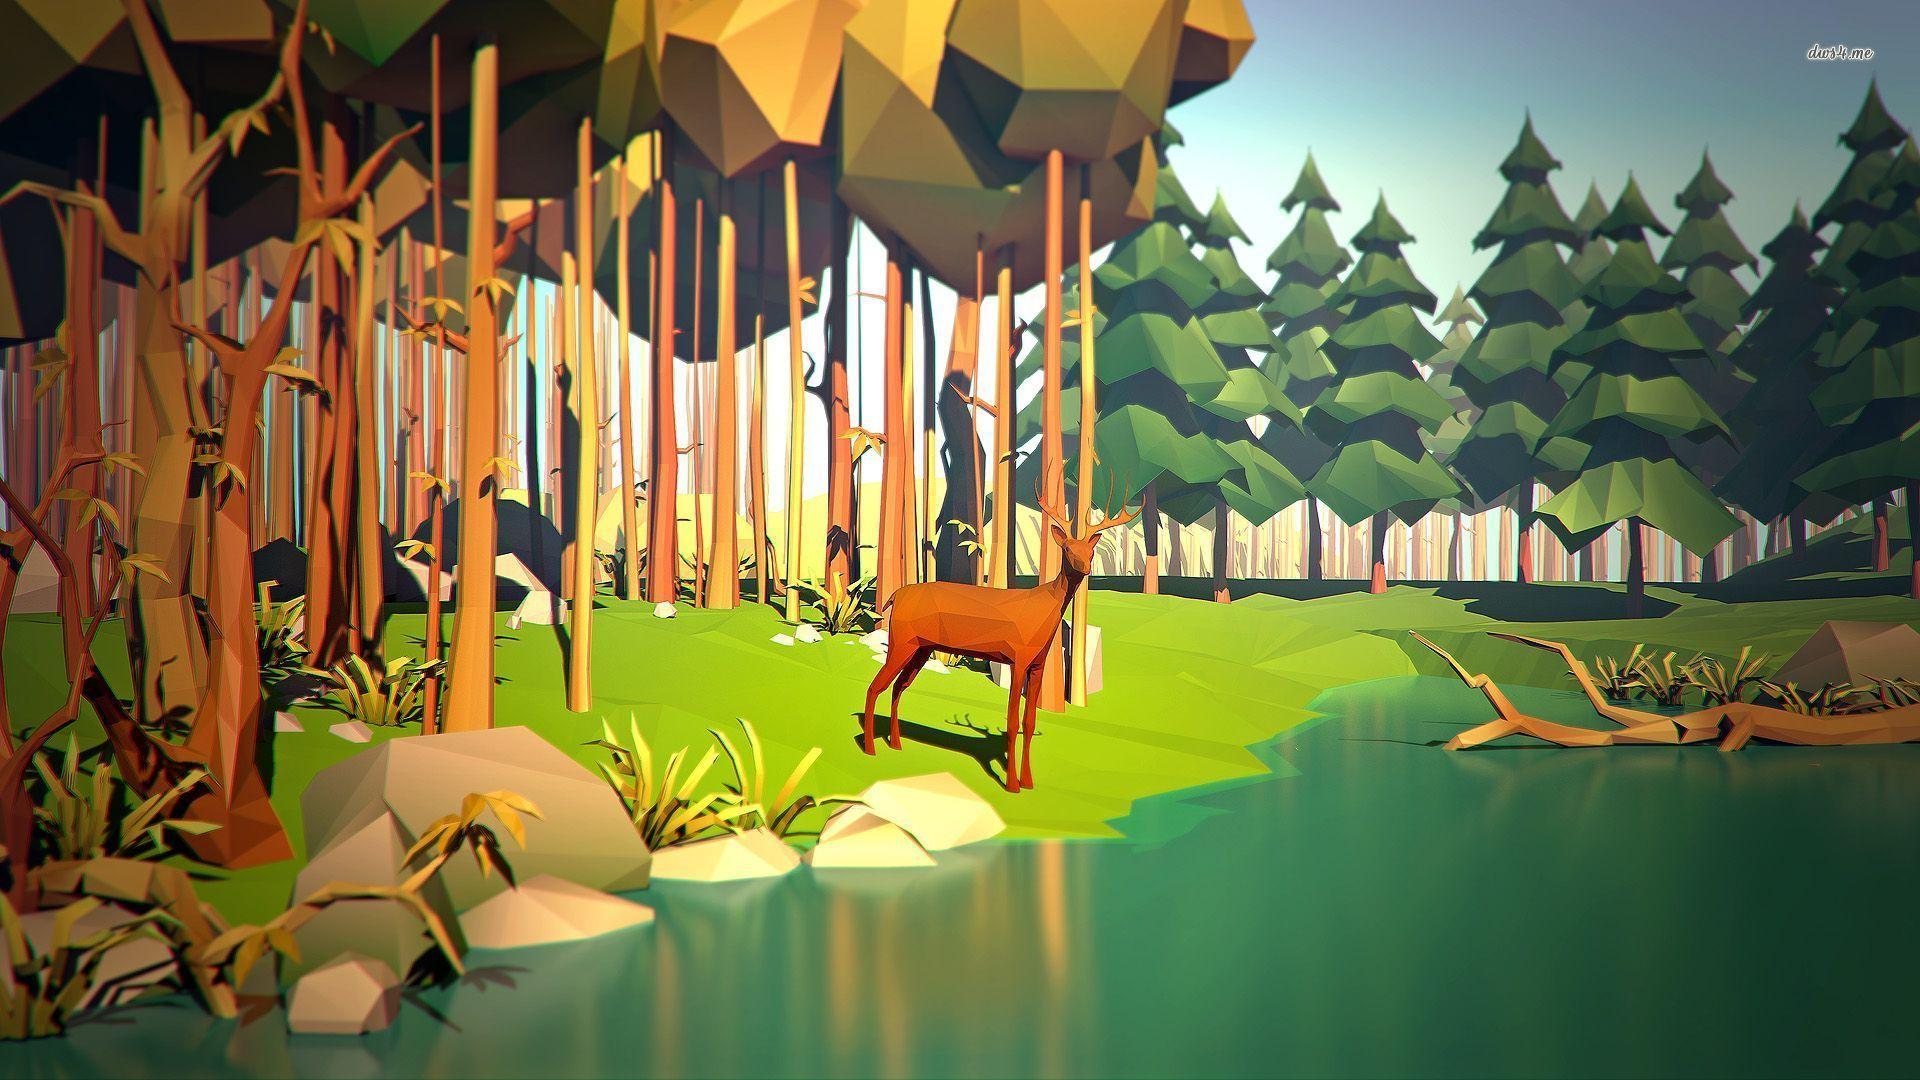 Polygon deer at the forest pond wallpaper wallpaper